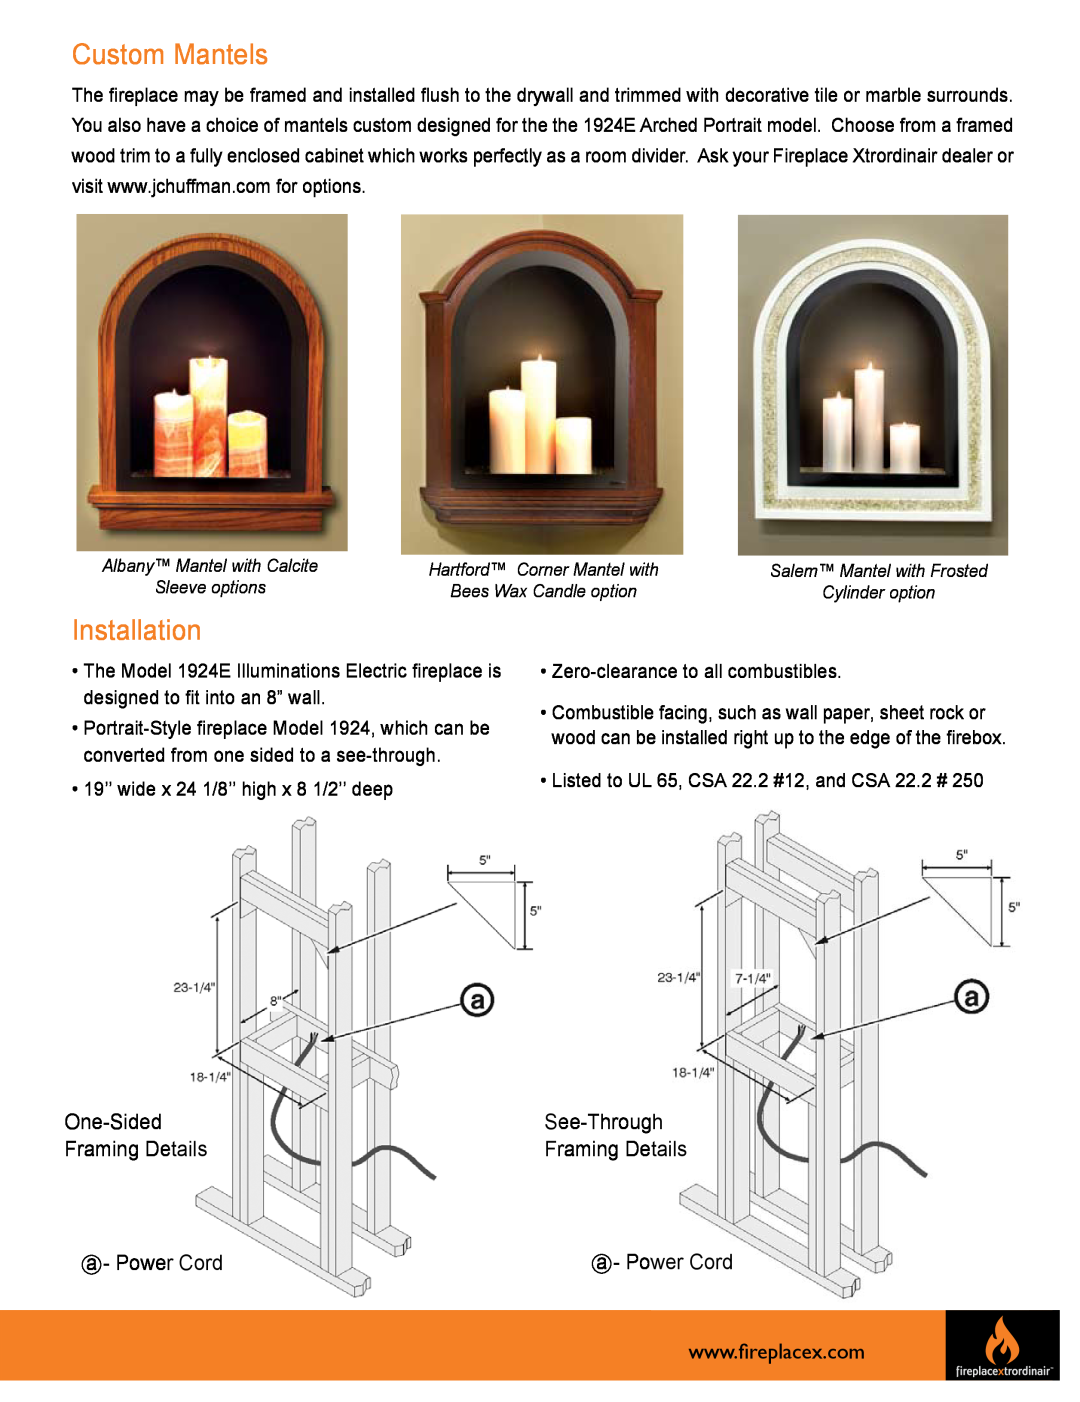 FireplaceXtrordinair 1924E, 4915E Custom Mantels, Installation, One-Sided, See-Through, Framing Details, a - Power Cord 